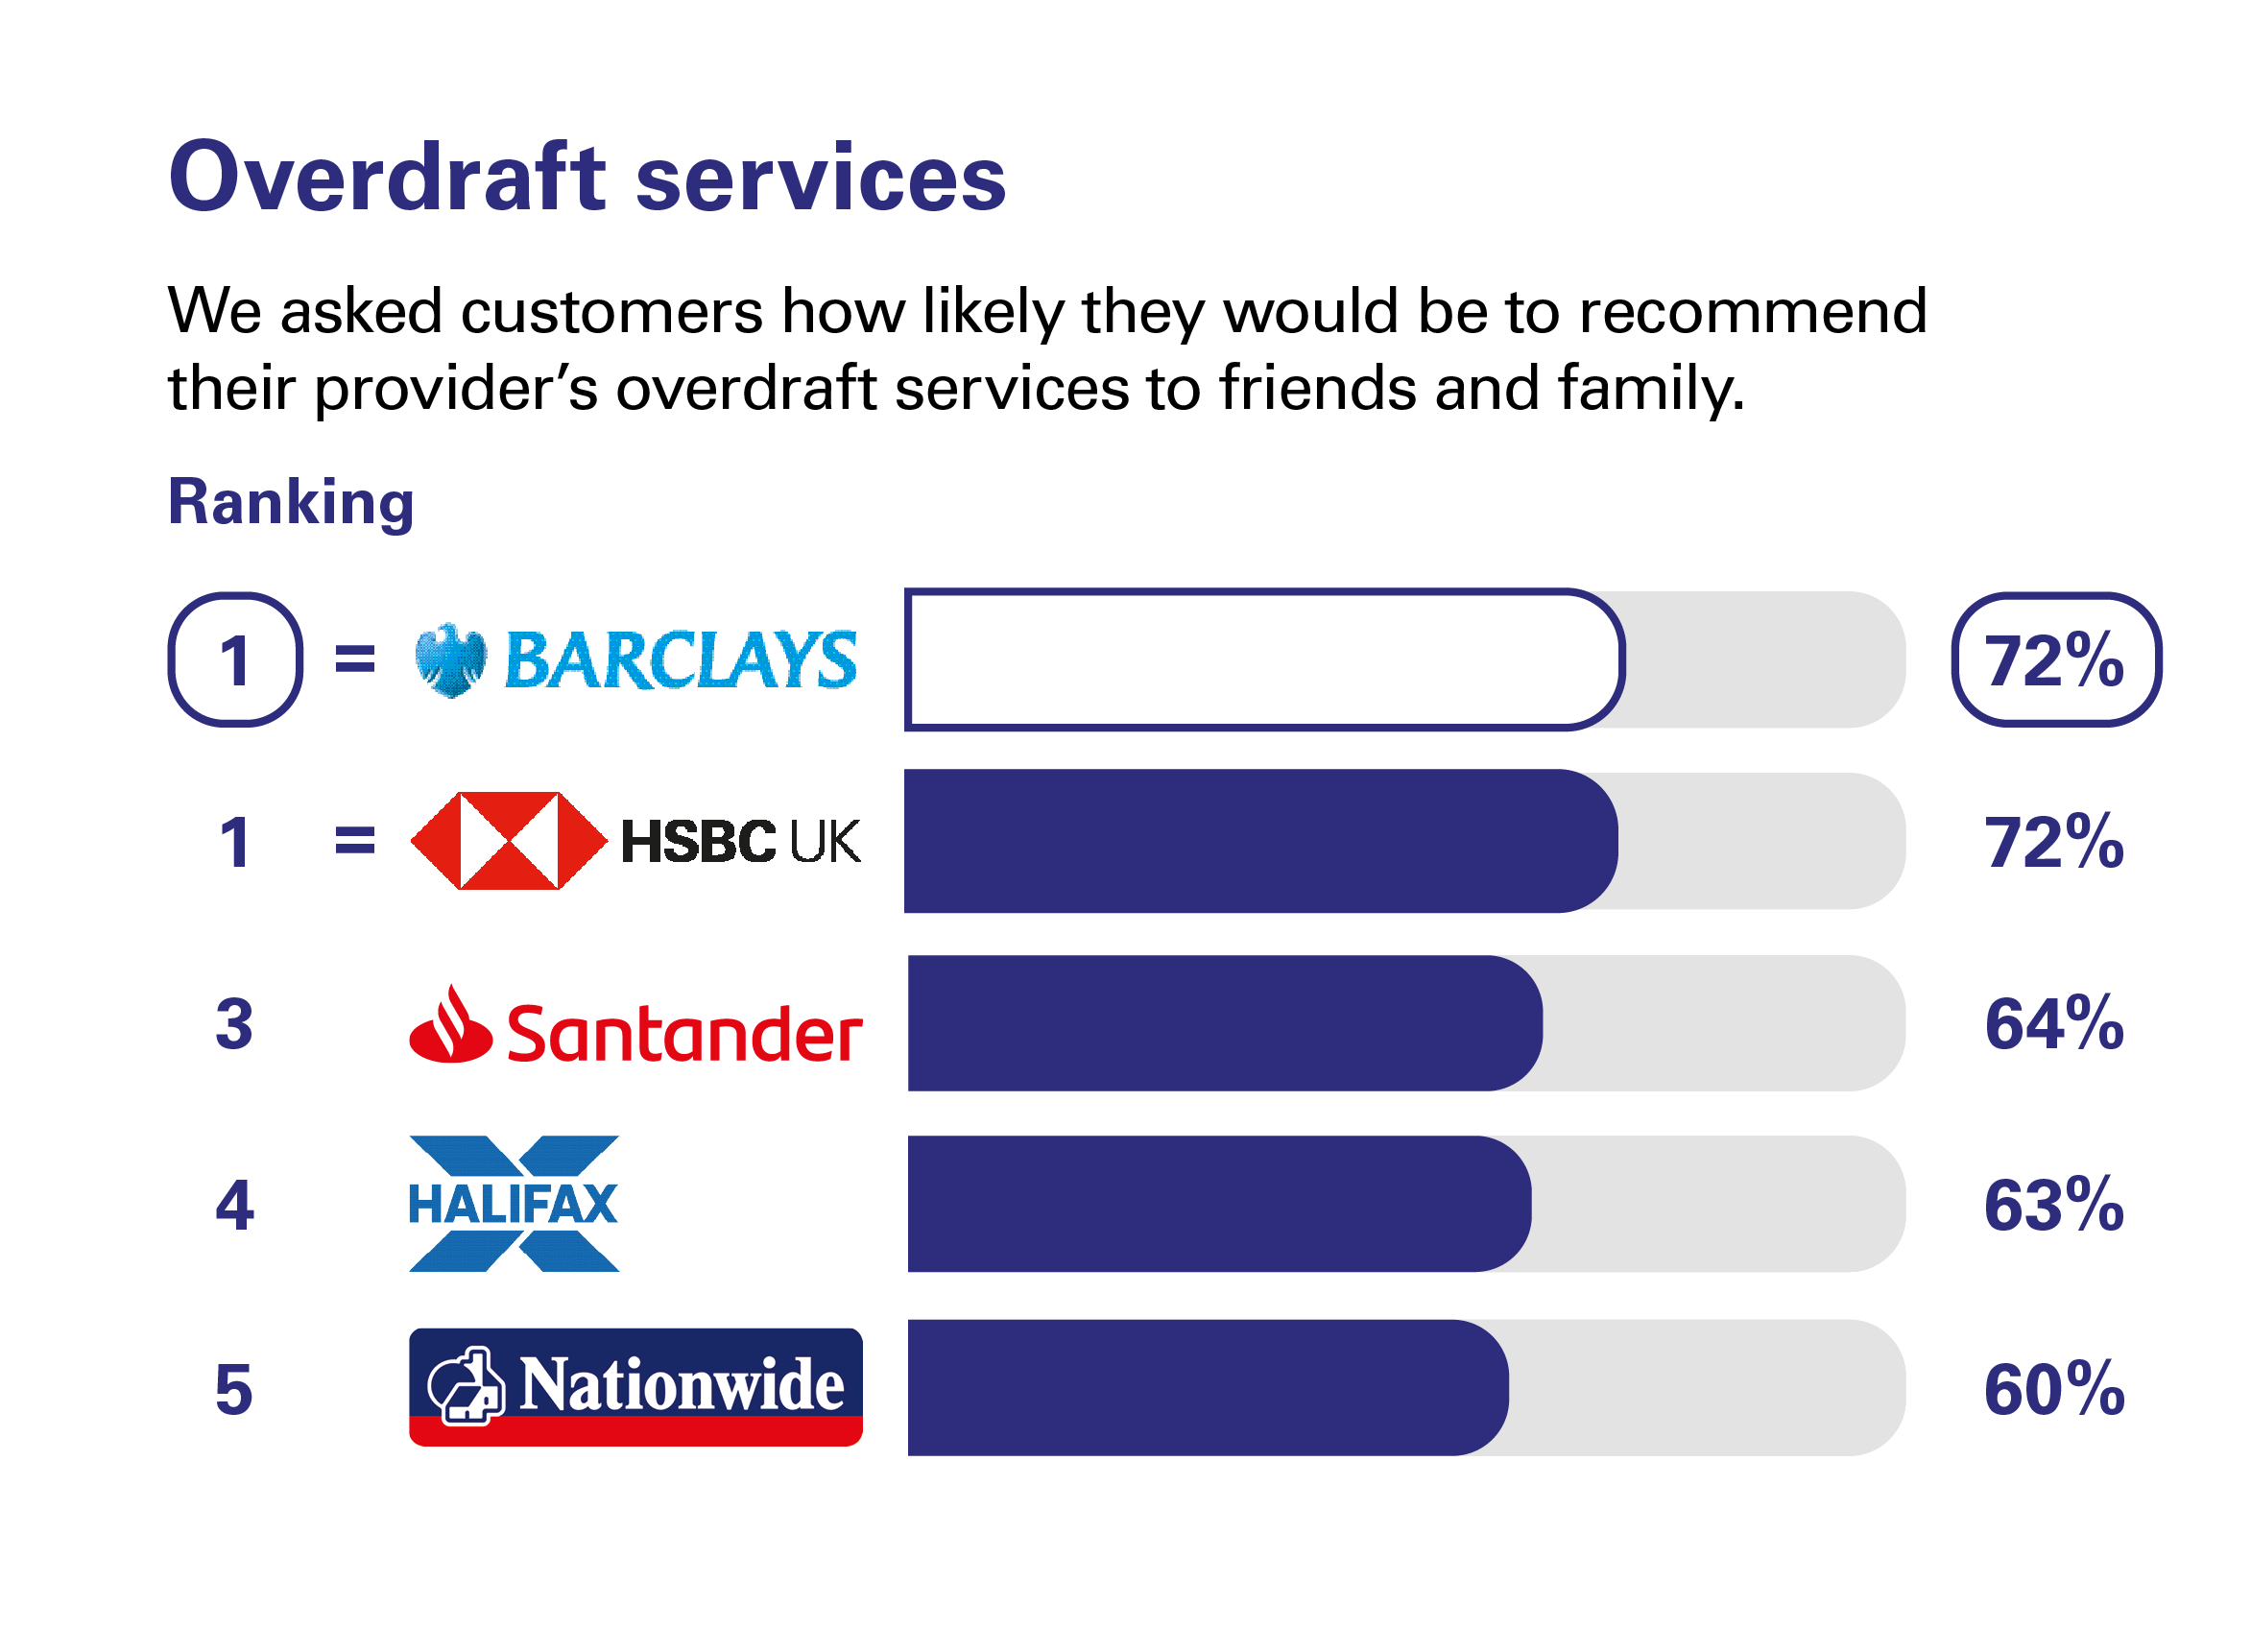 Overdraft services ranking - Personal current accounts Northern Ireland